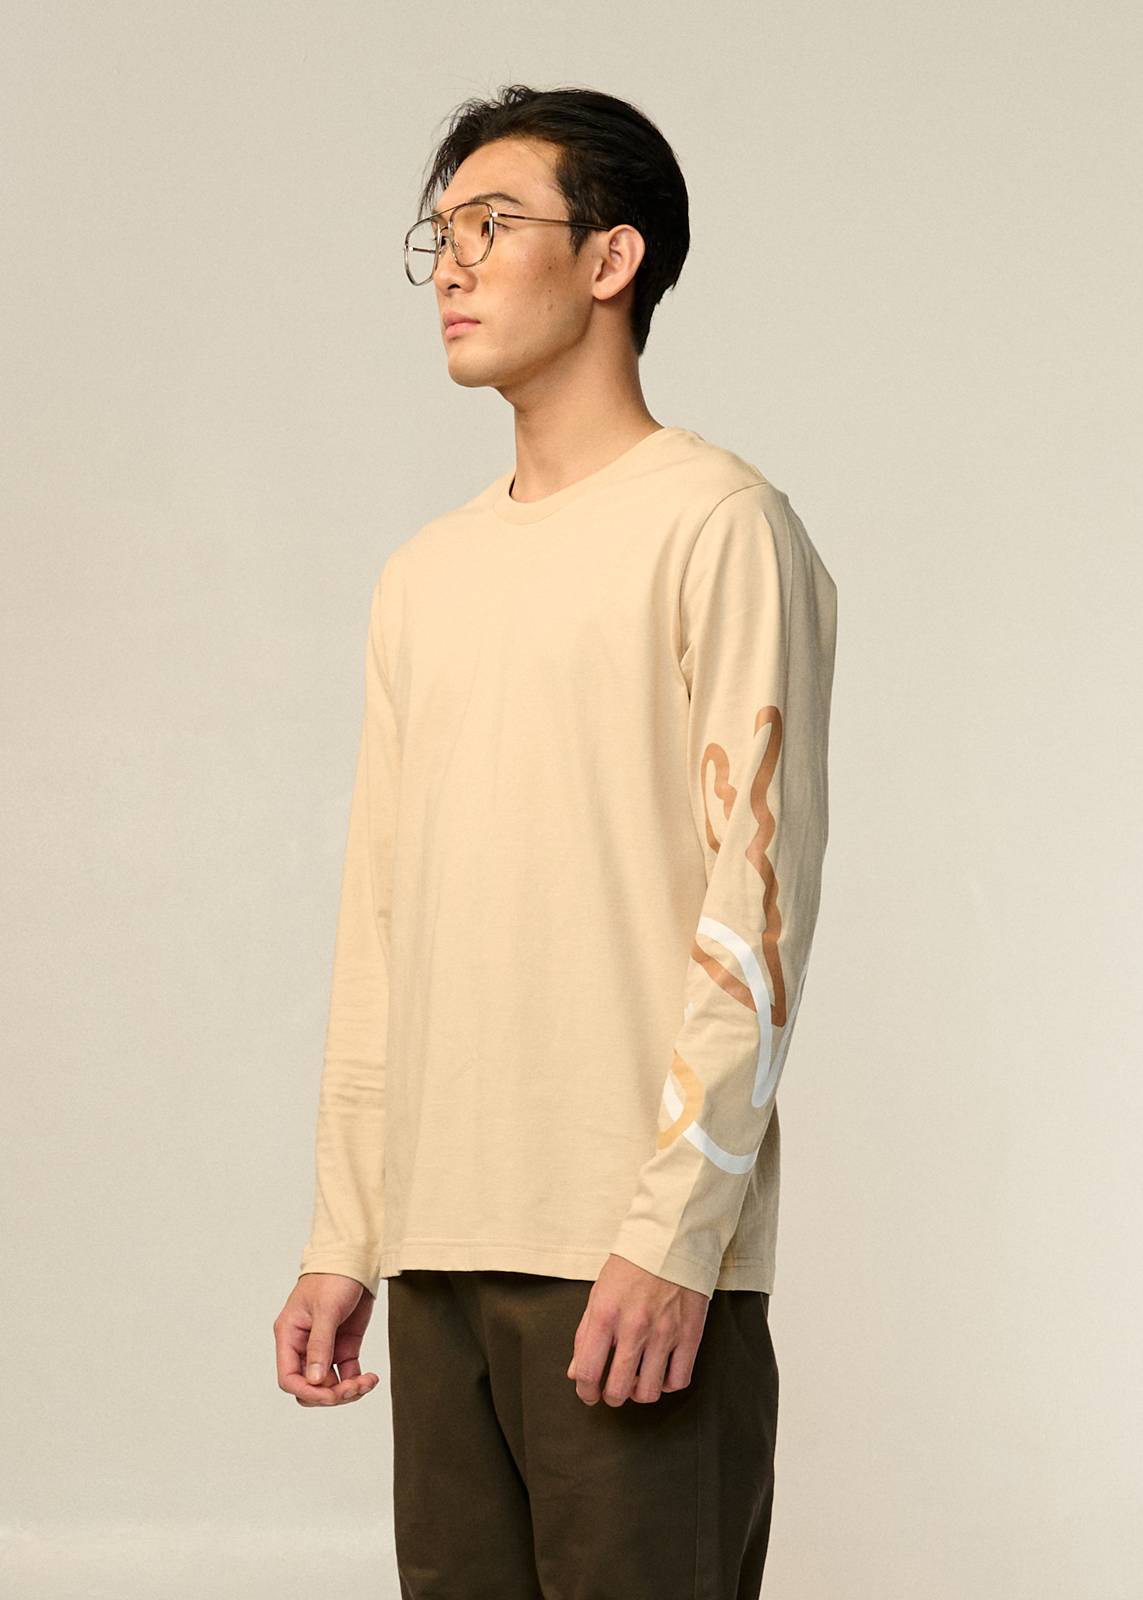 ENHANCED NEUTRALS CUSTOM FIT CREW NECK LONG SLEEVE T-SHIRT WITH GRAPHIC PRINT